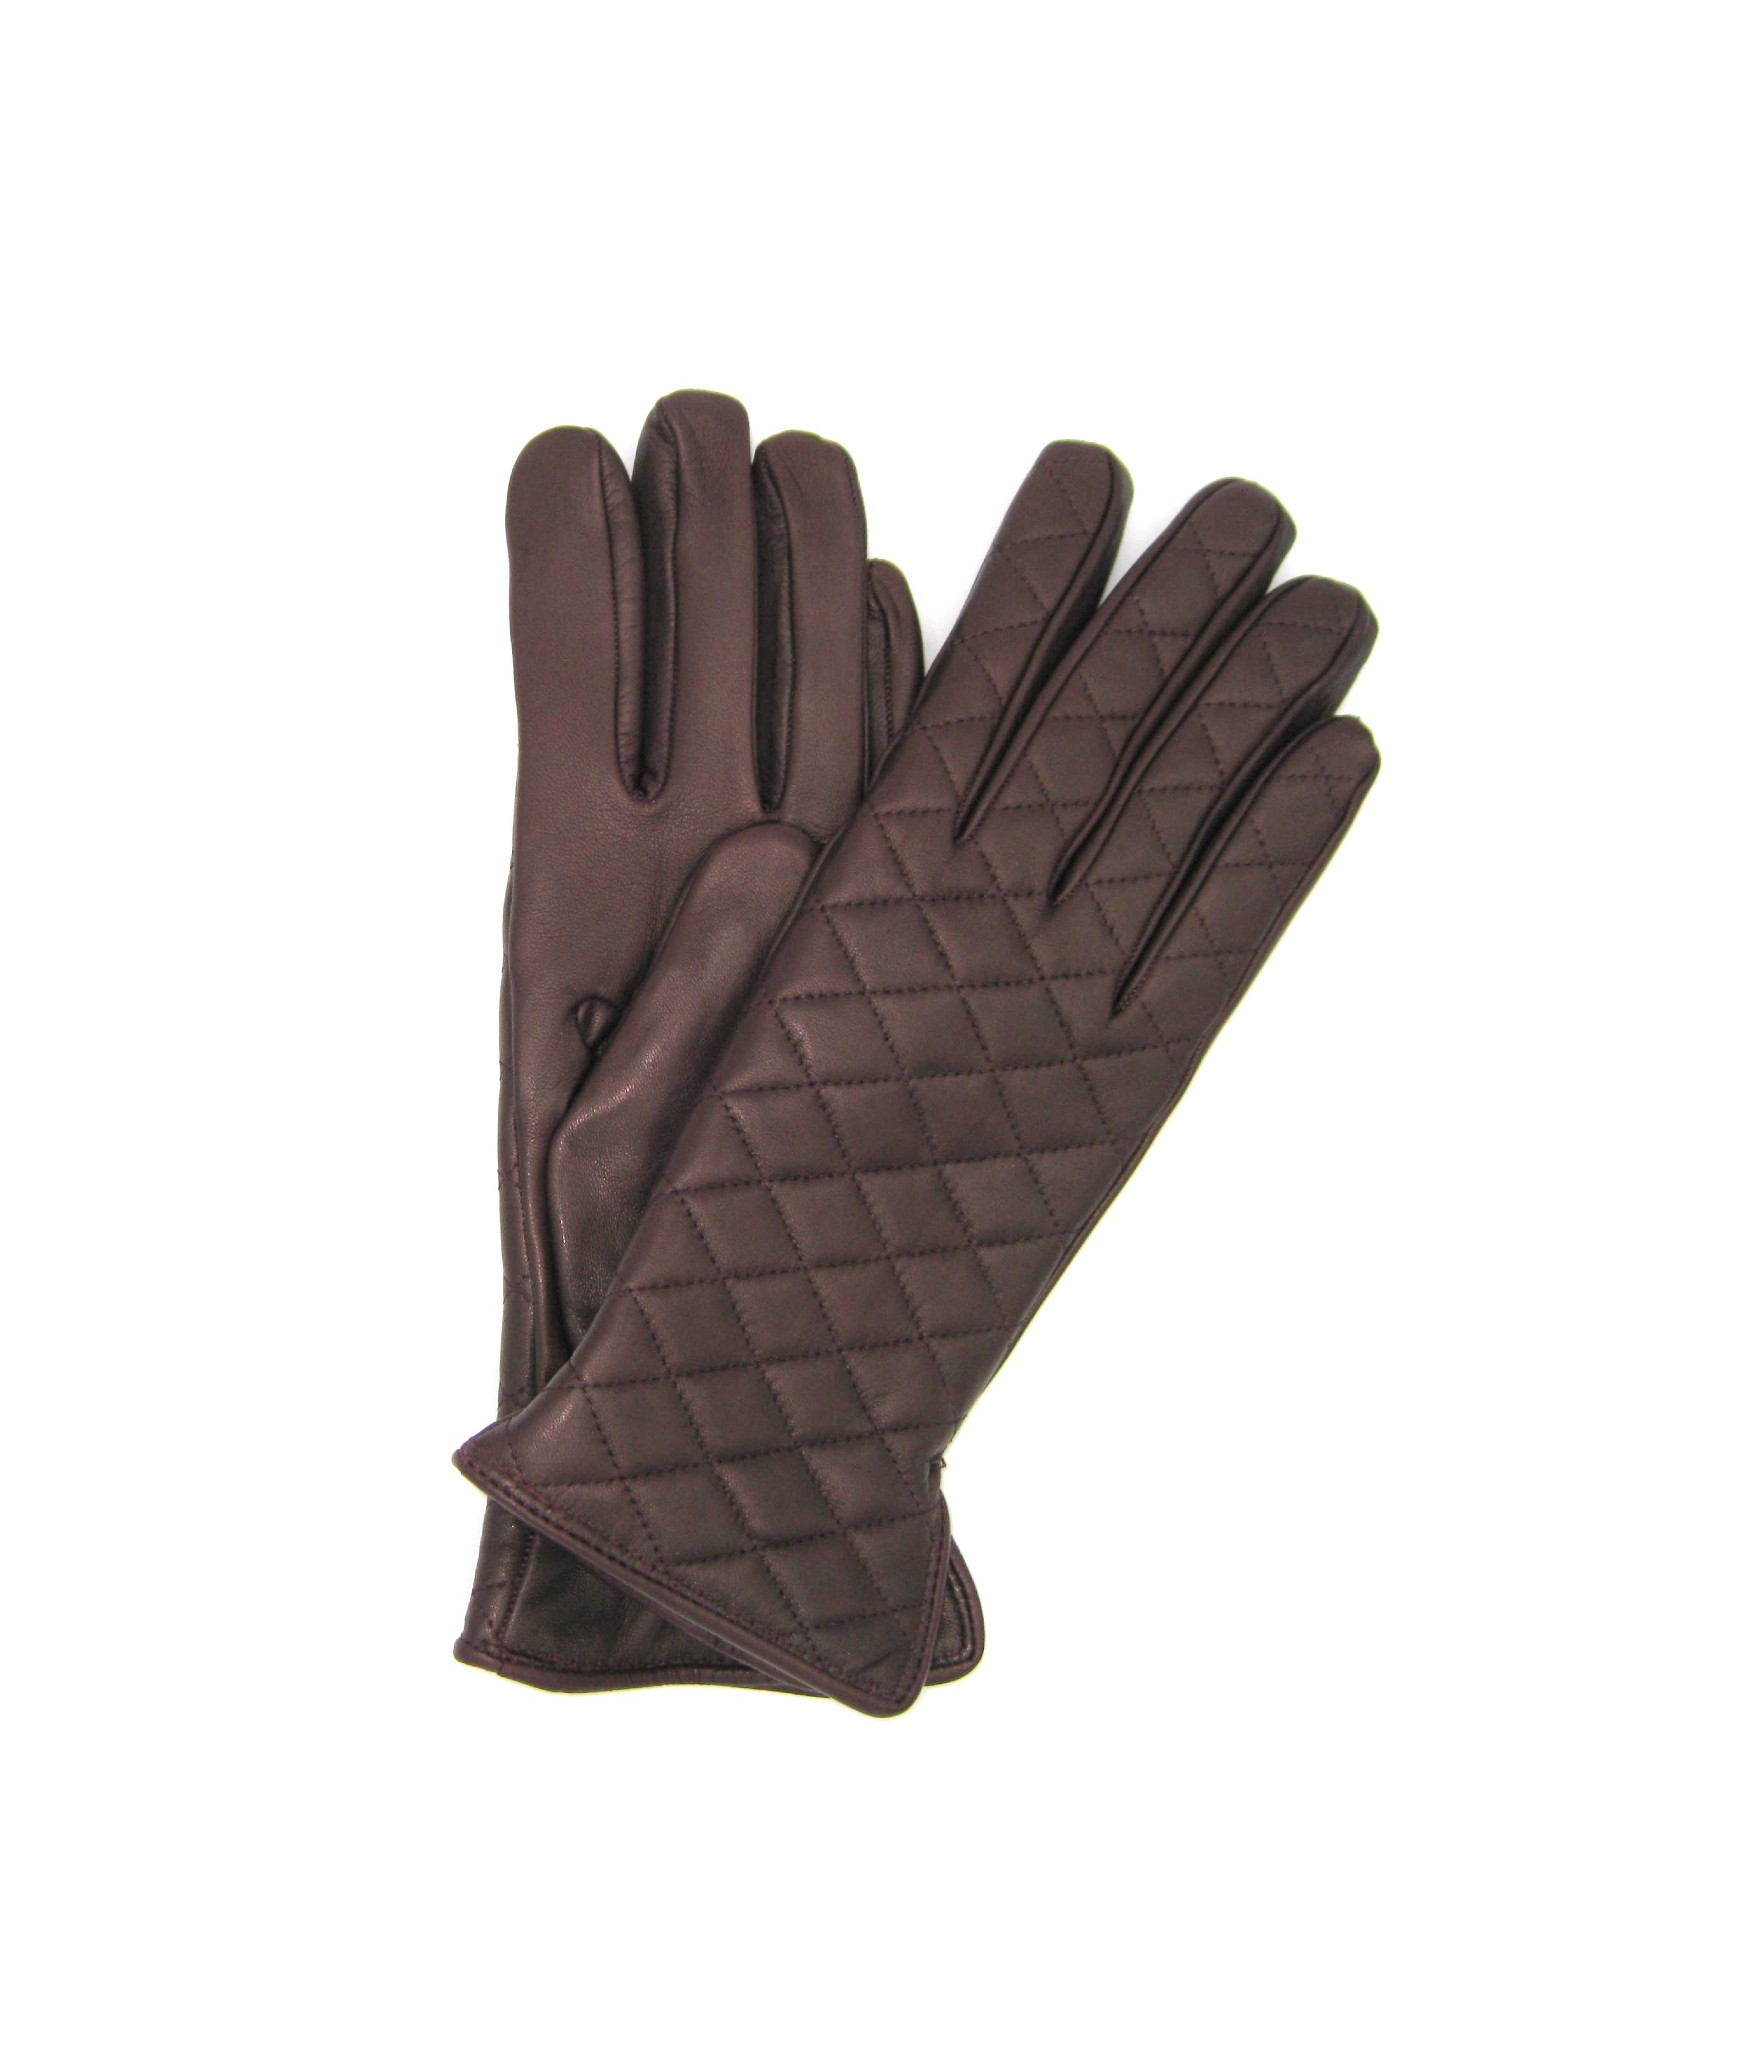 Woman Fashion Quilted Nappa leather gloves 2bt cashmere lined